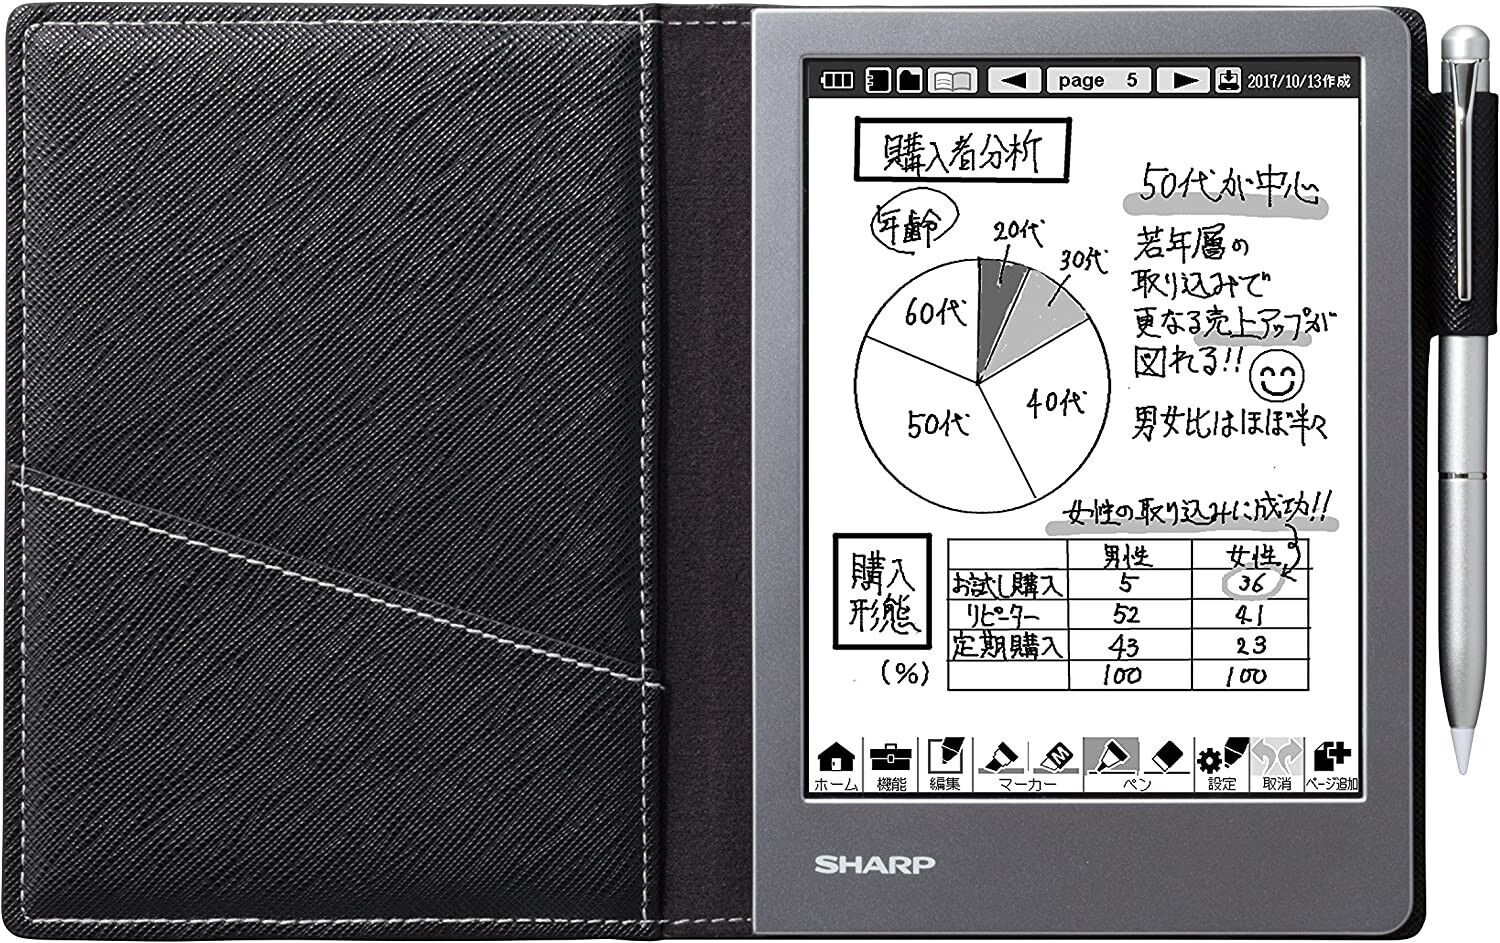 SHARP WG-S50 Black Electronic Notebook Digital Hand Writing Note Memo Pad Tablet